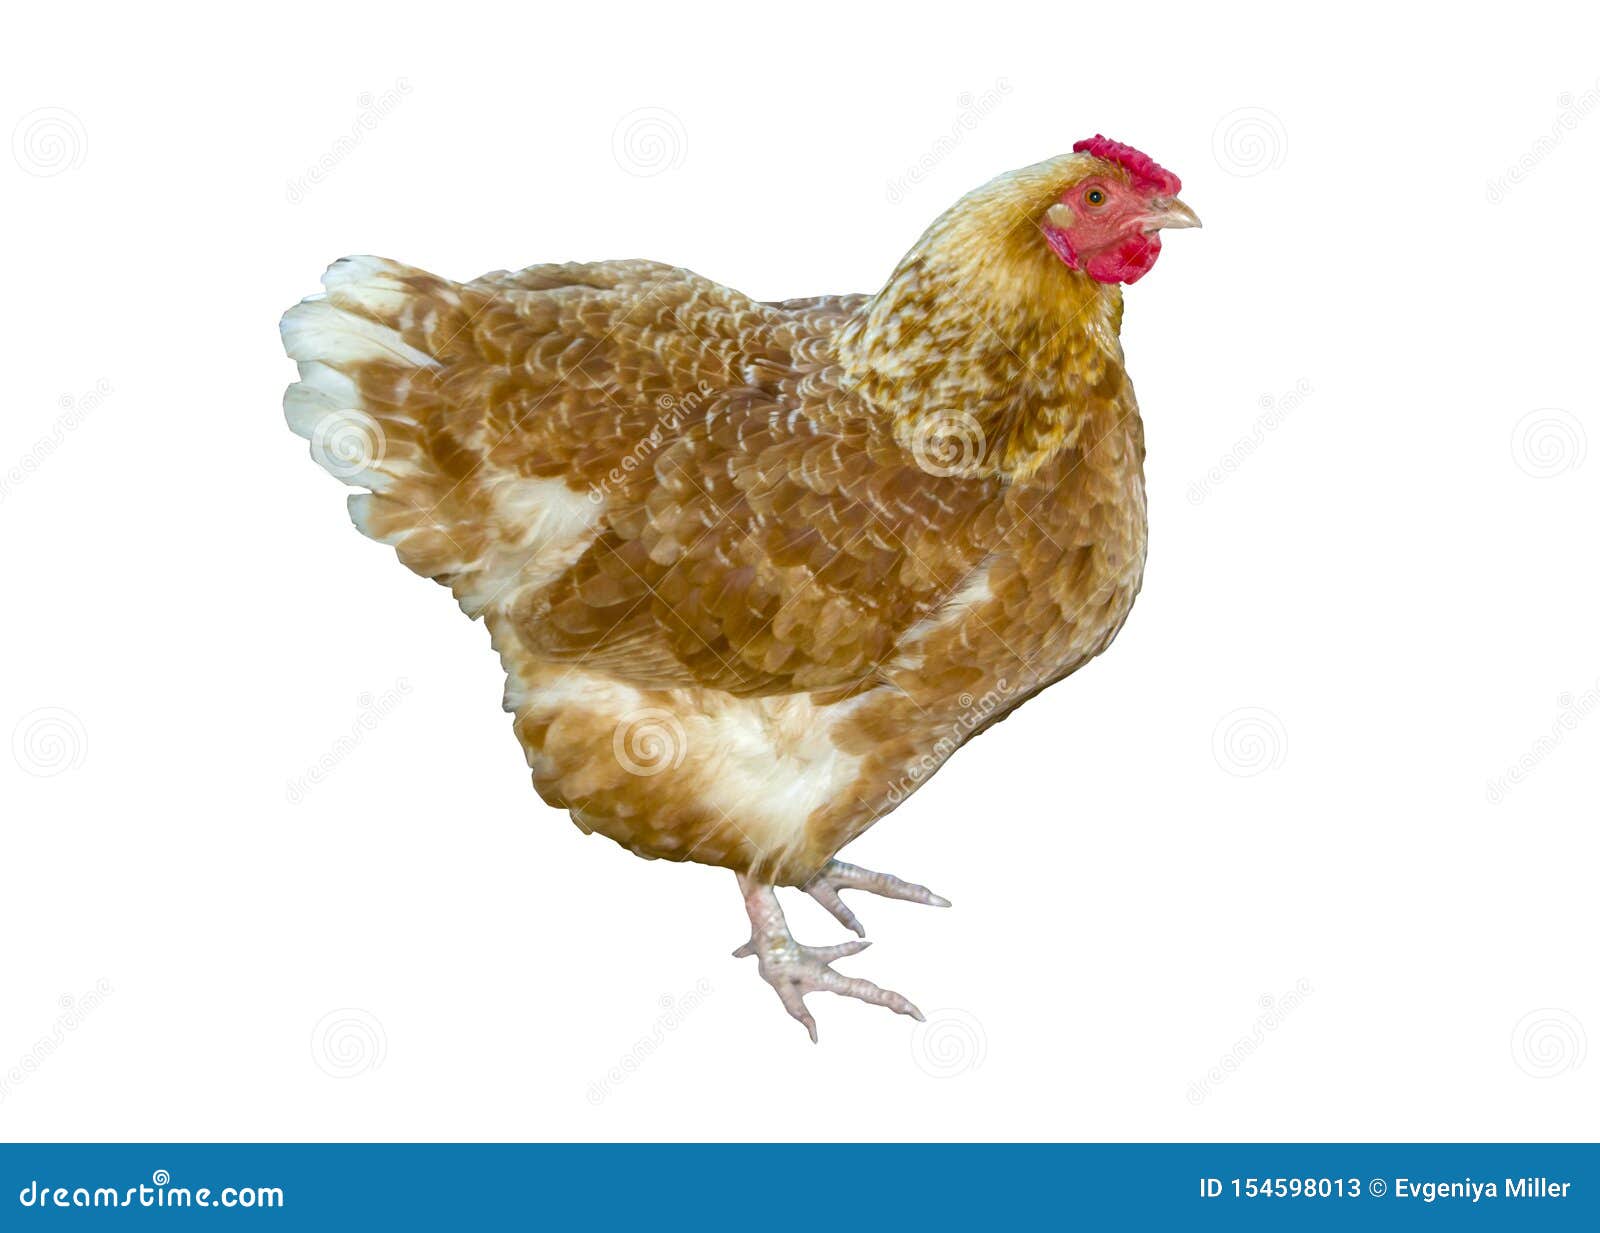 Hen Standing Chicken Isolated On White Background Stock Image - Image